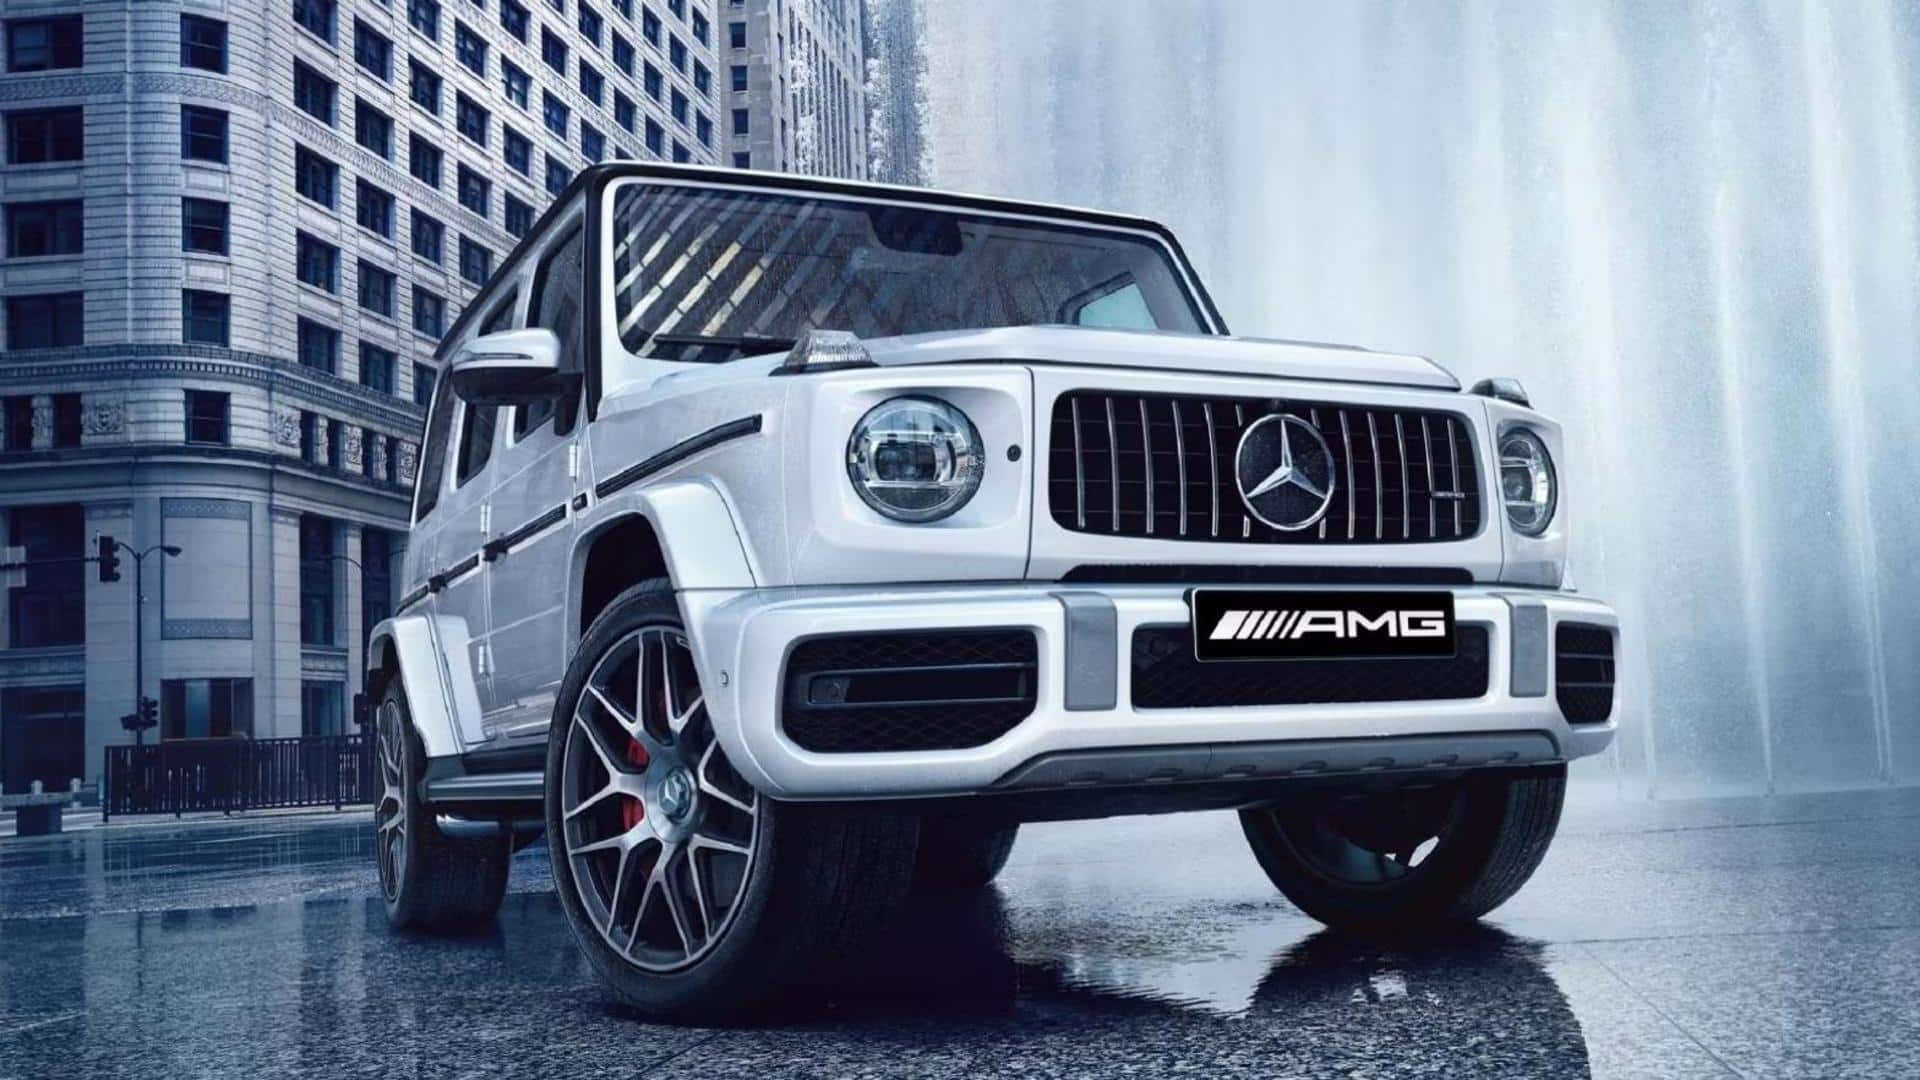 At Rs. 3.3cr, what makes Mercedes-AMG G 63 so expensive